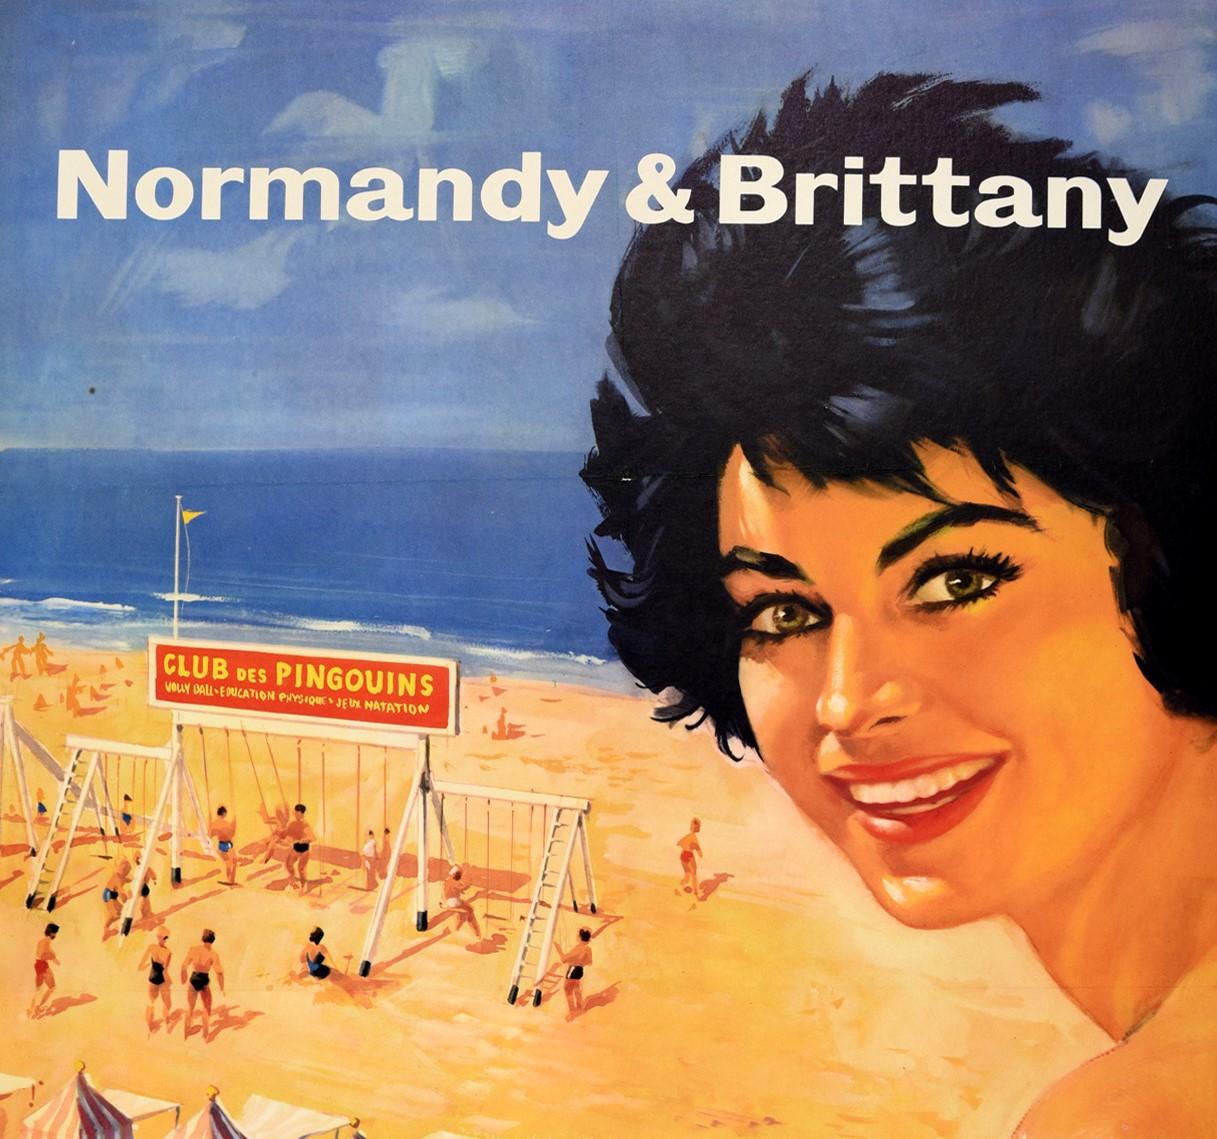 Original vintage travel poster for Normandy & Brittany by Train and Ship issued by the Southern region of British Railways featuring great artwork by Eric William Pulford (1915-2005) depicting a summer holiday scene with a smiling lady looking to